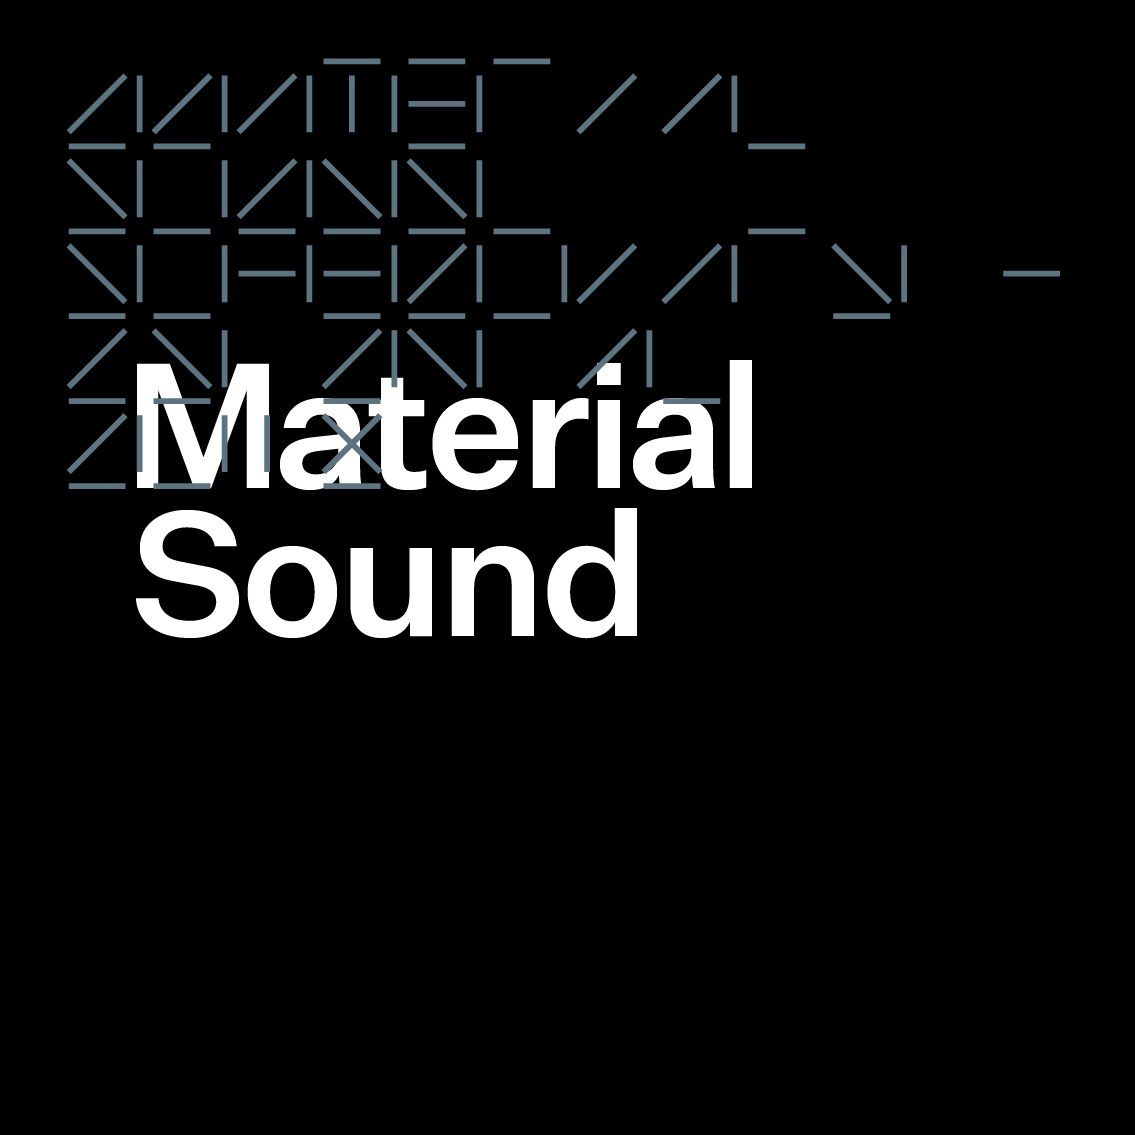 Material Sound exhibition at NorthSite